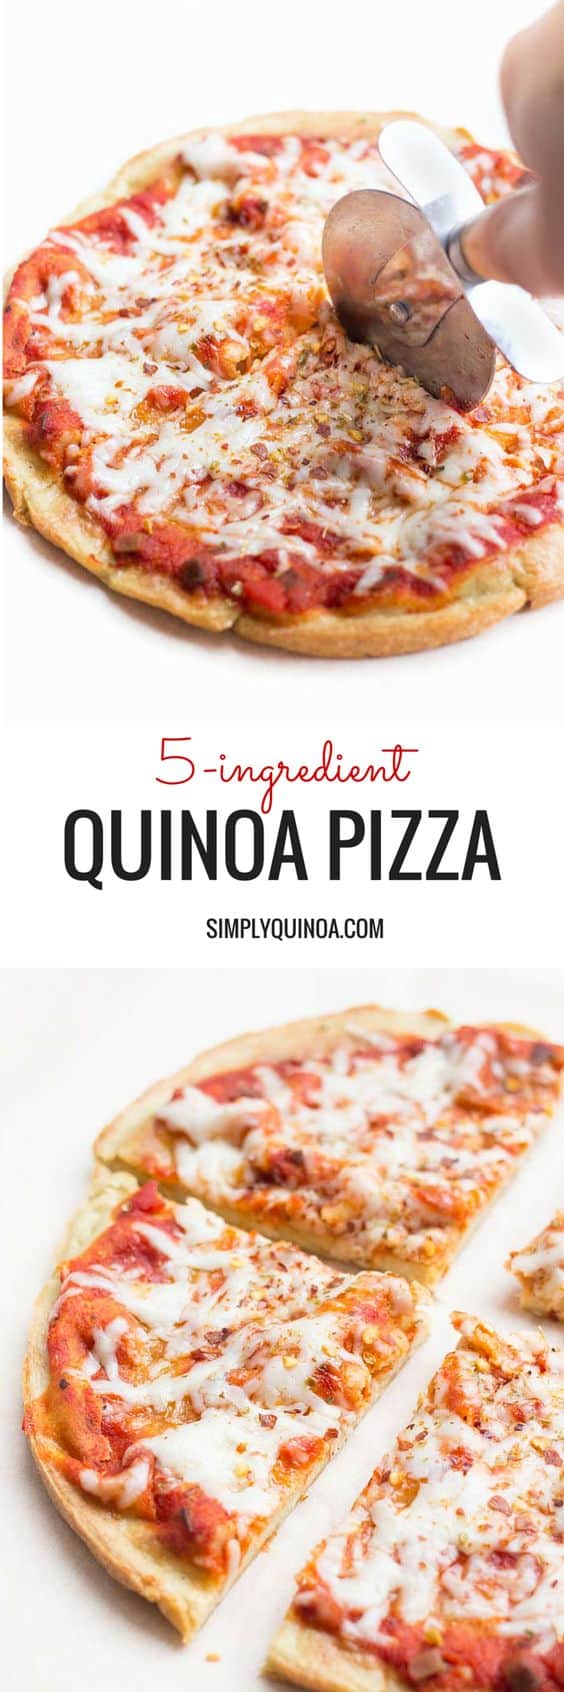 5-Ingredient Quinoa Pizza Crust -- the only gluten-free pizza you will ever need! The pizza crust is dairy-free - use your favorite dairy-free toppings (skip the goat cheese!)